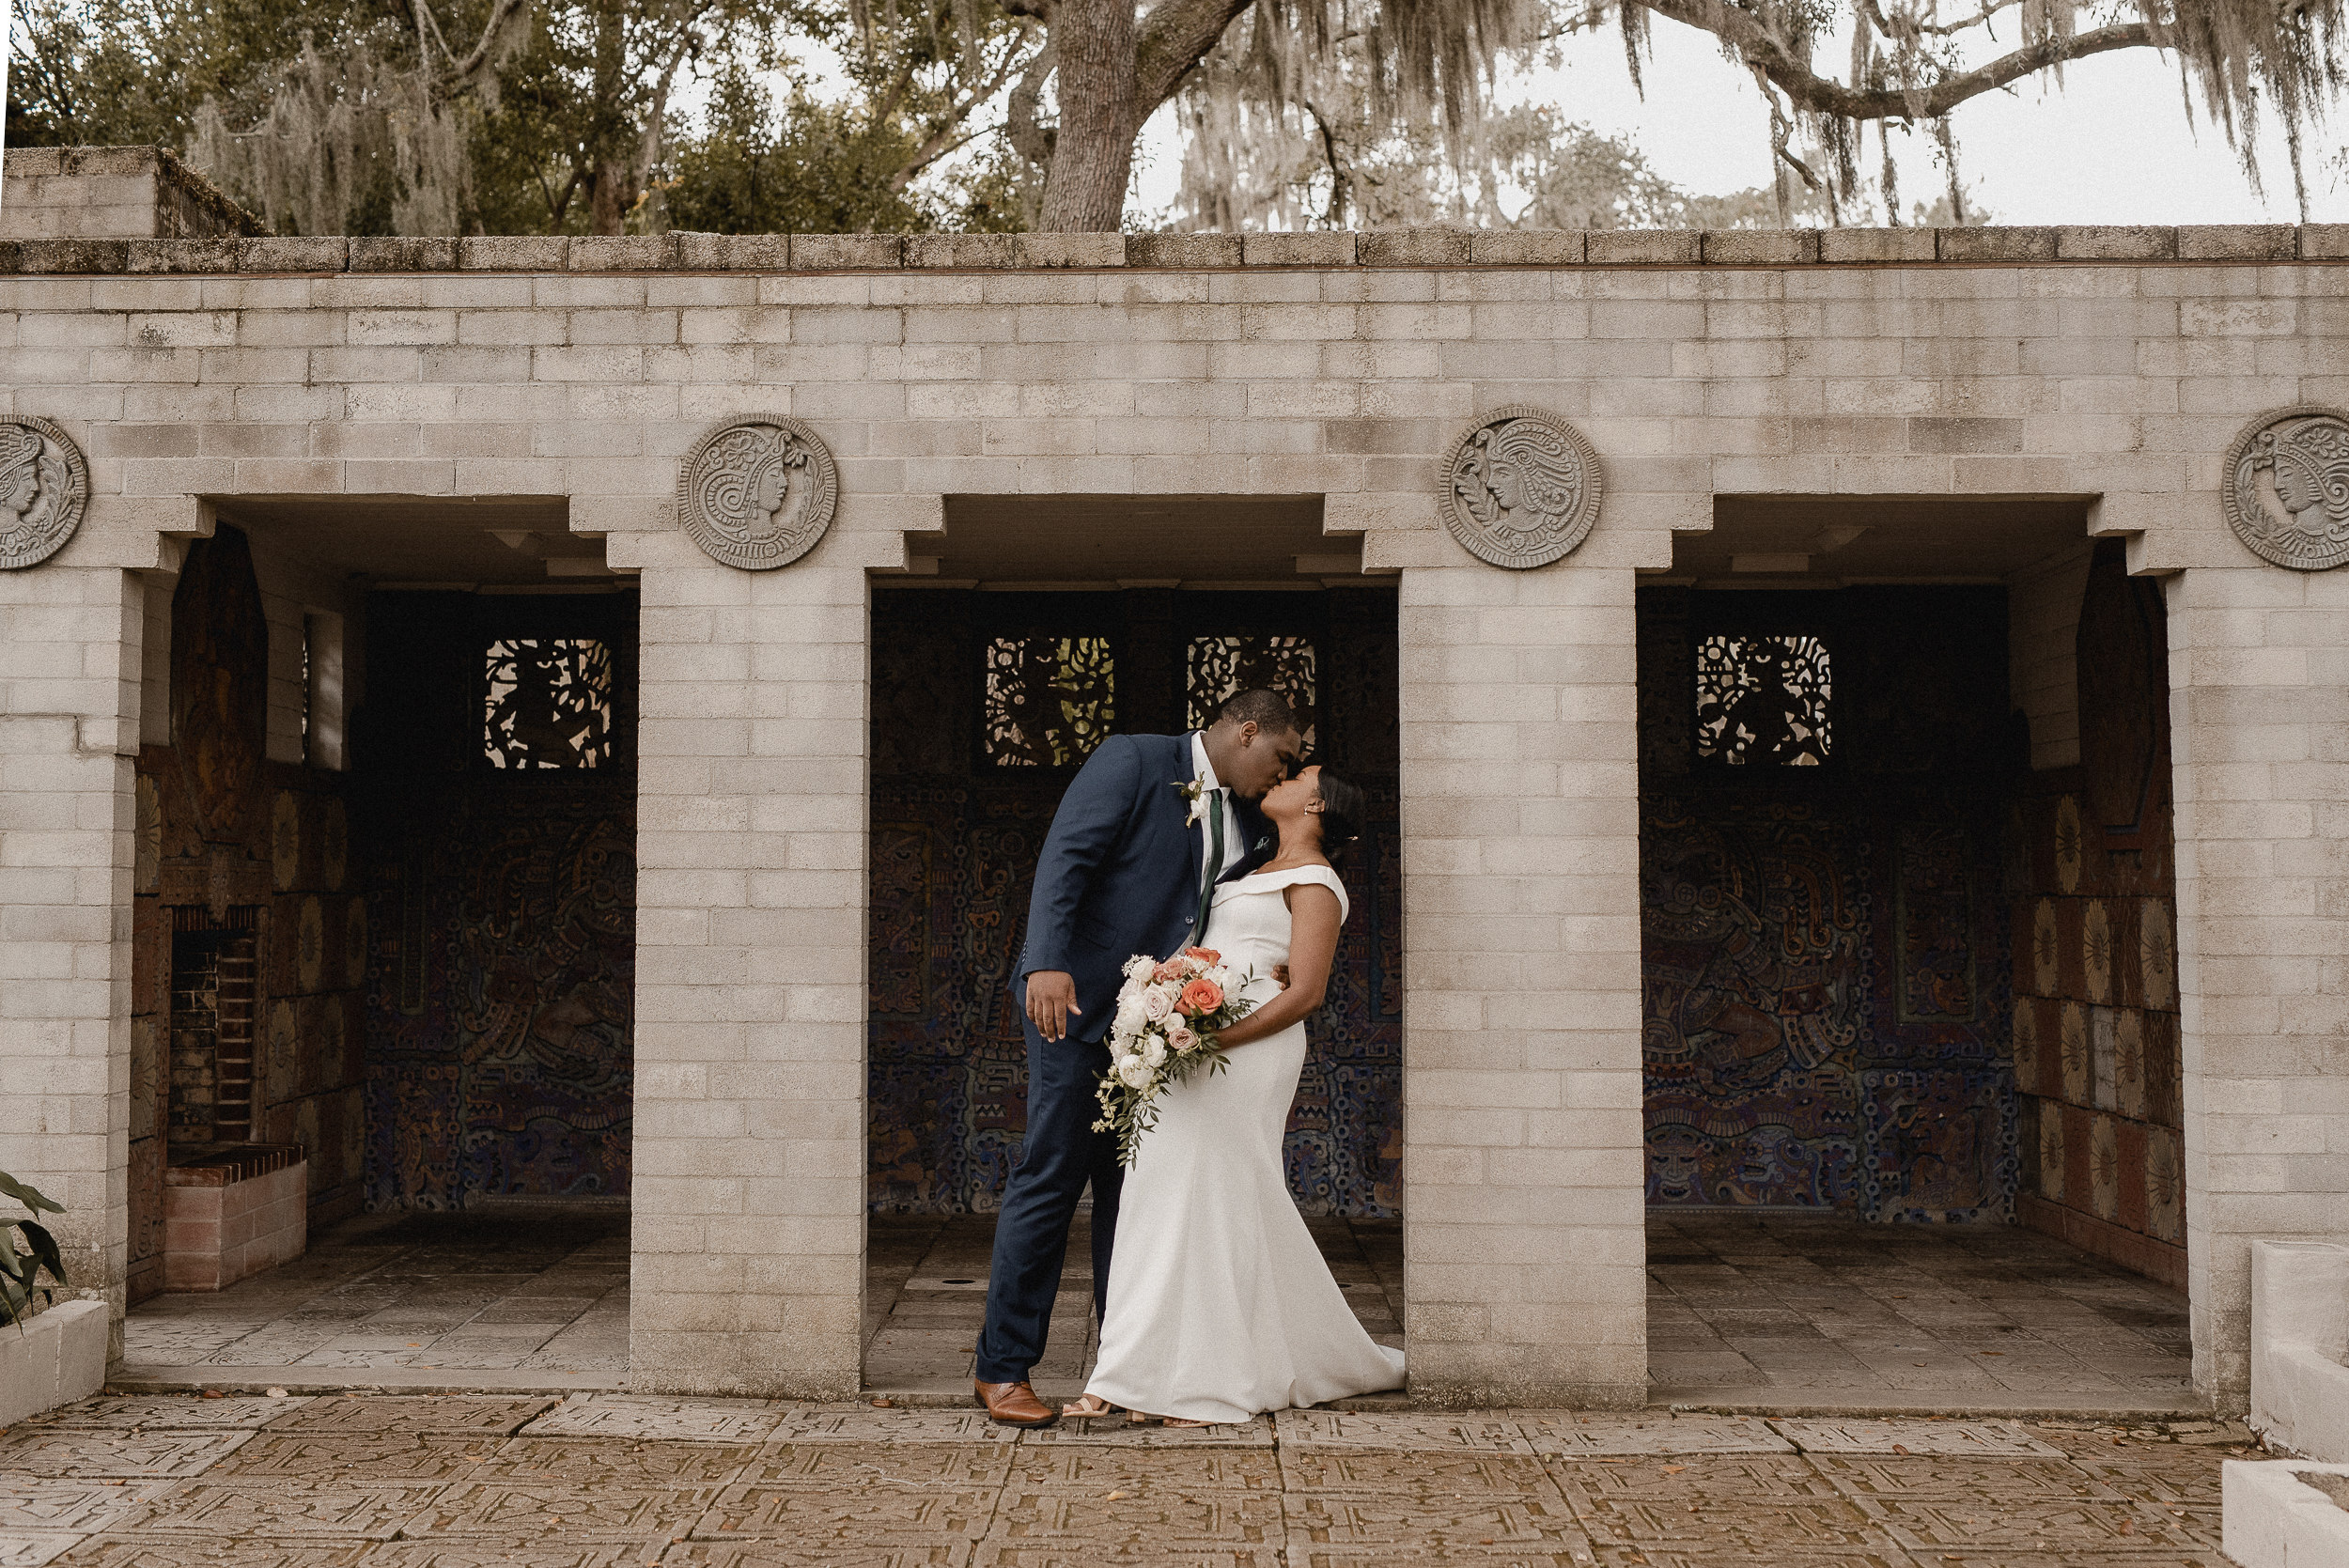 Florida Georgia Couples, Anniversary, Proposal, Engagement, Destination Elopement and Intimate Wedding Photographer Orlando Local Mayan Courtyard Maitland art and history museum